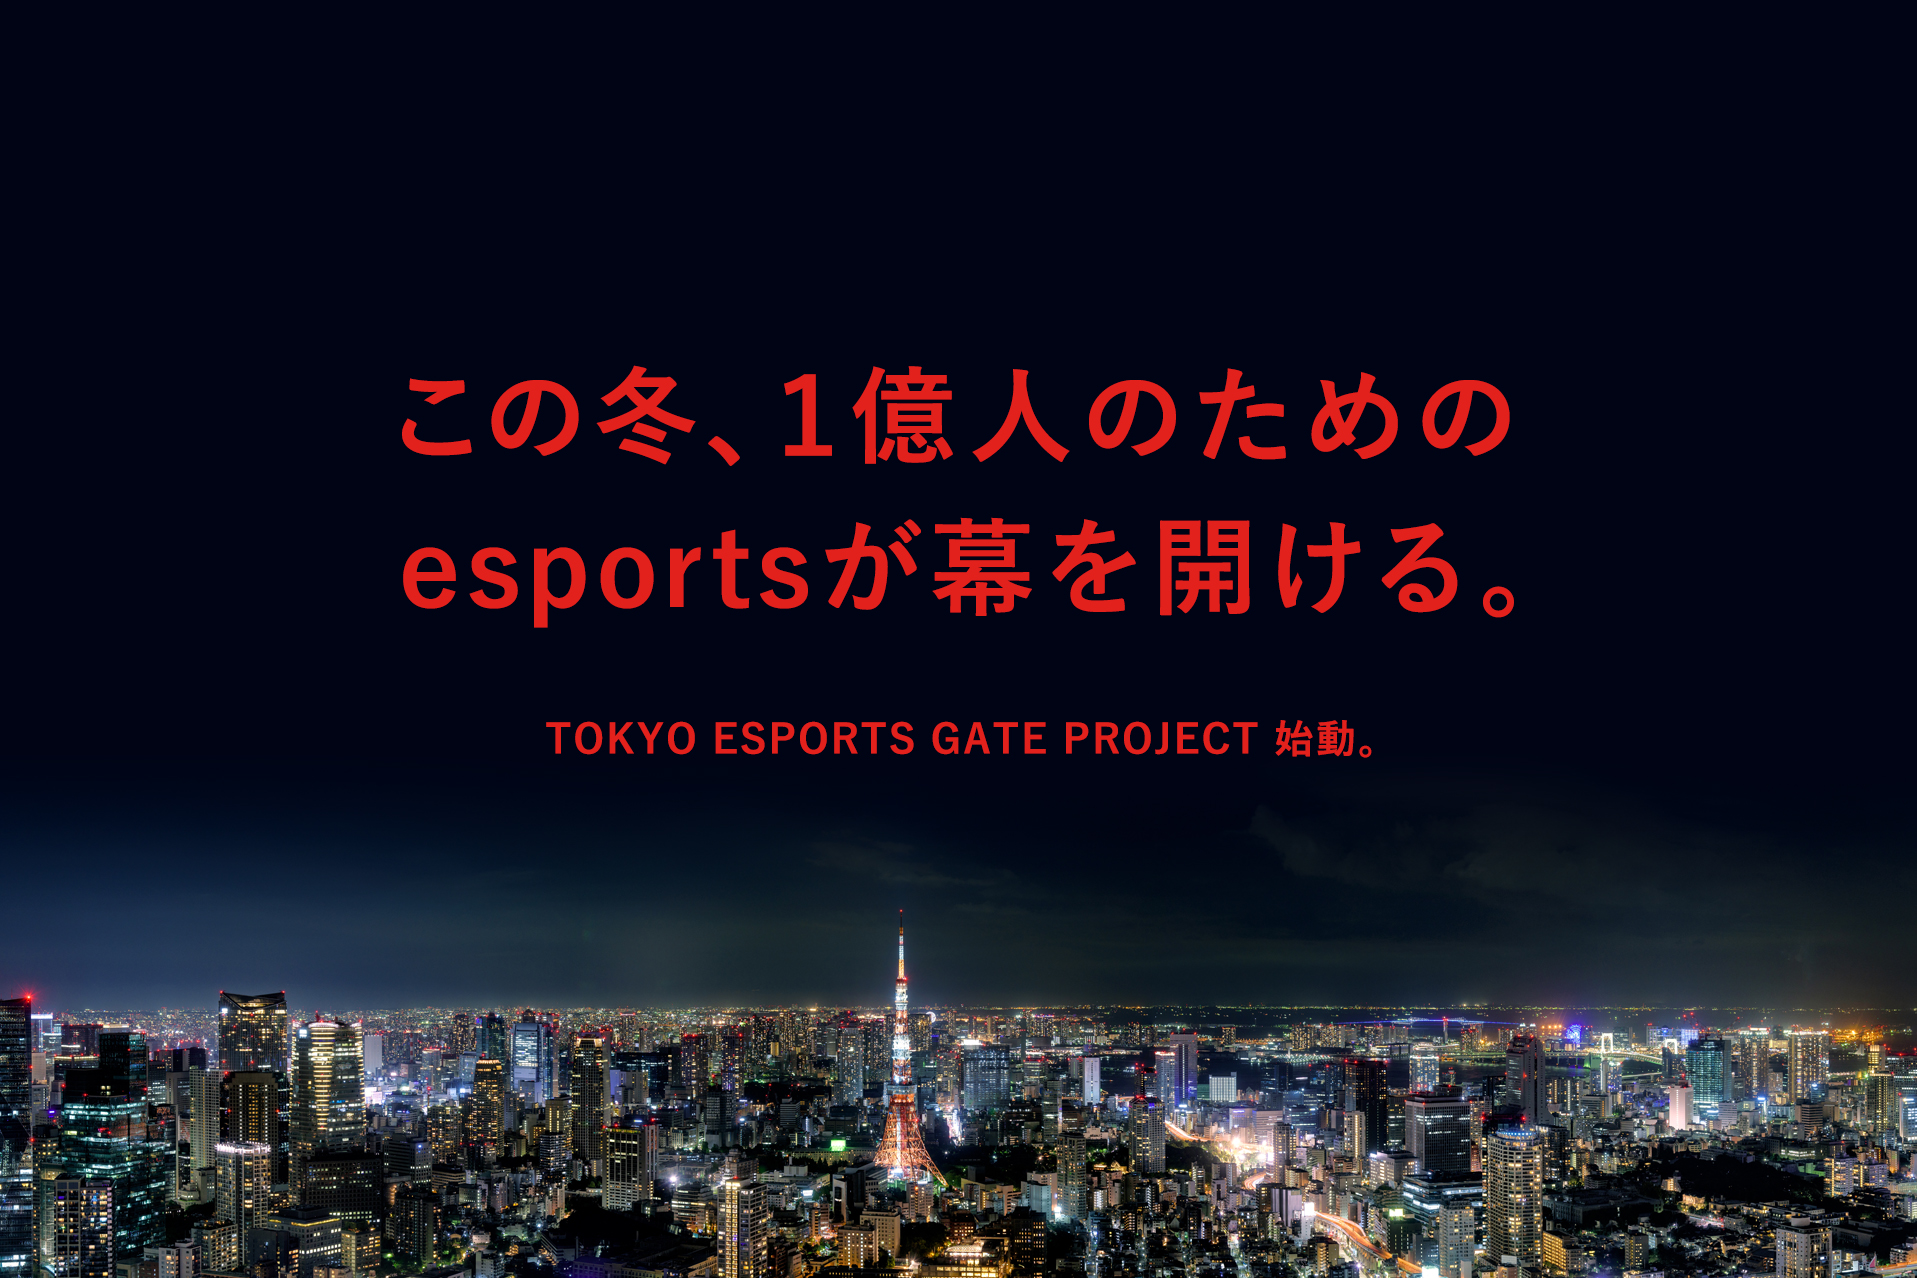 ENTERTAINMENT PROJECT　TOKYO ESPORTS GATE PROJECT